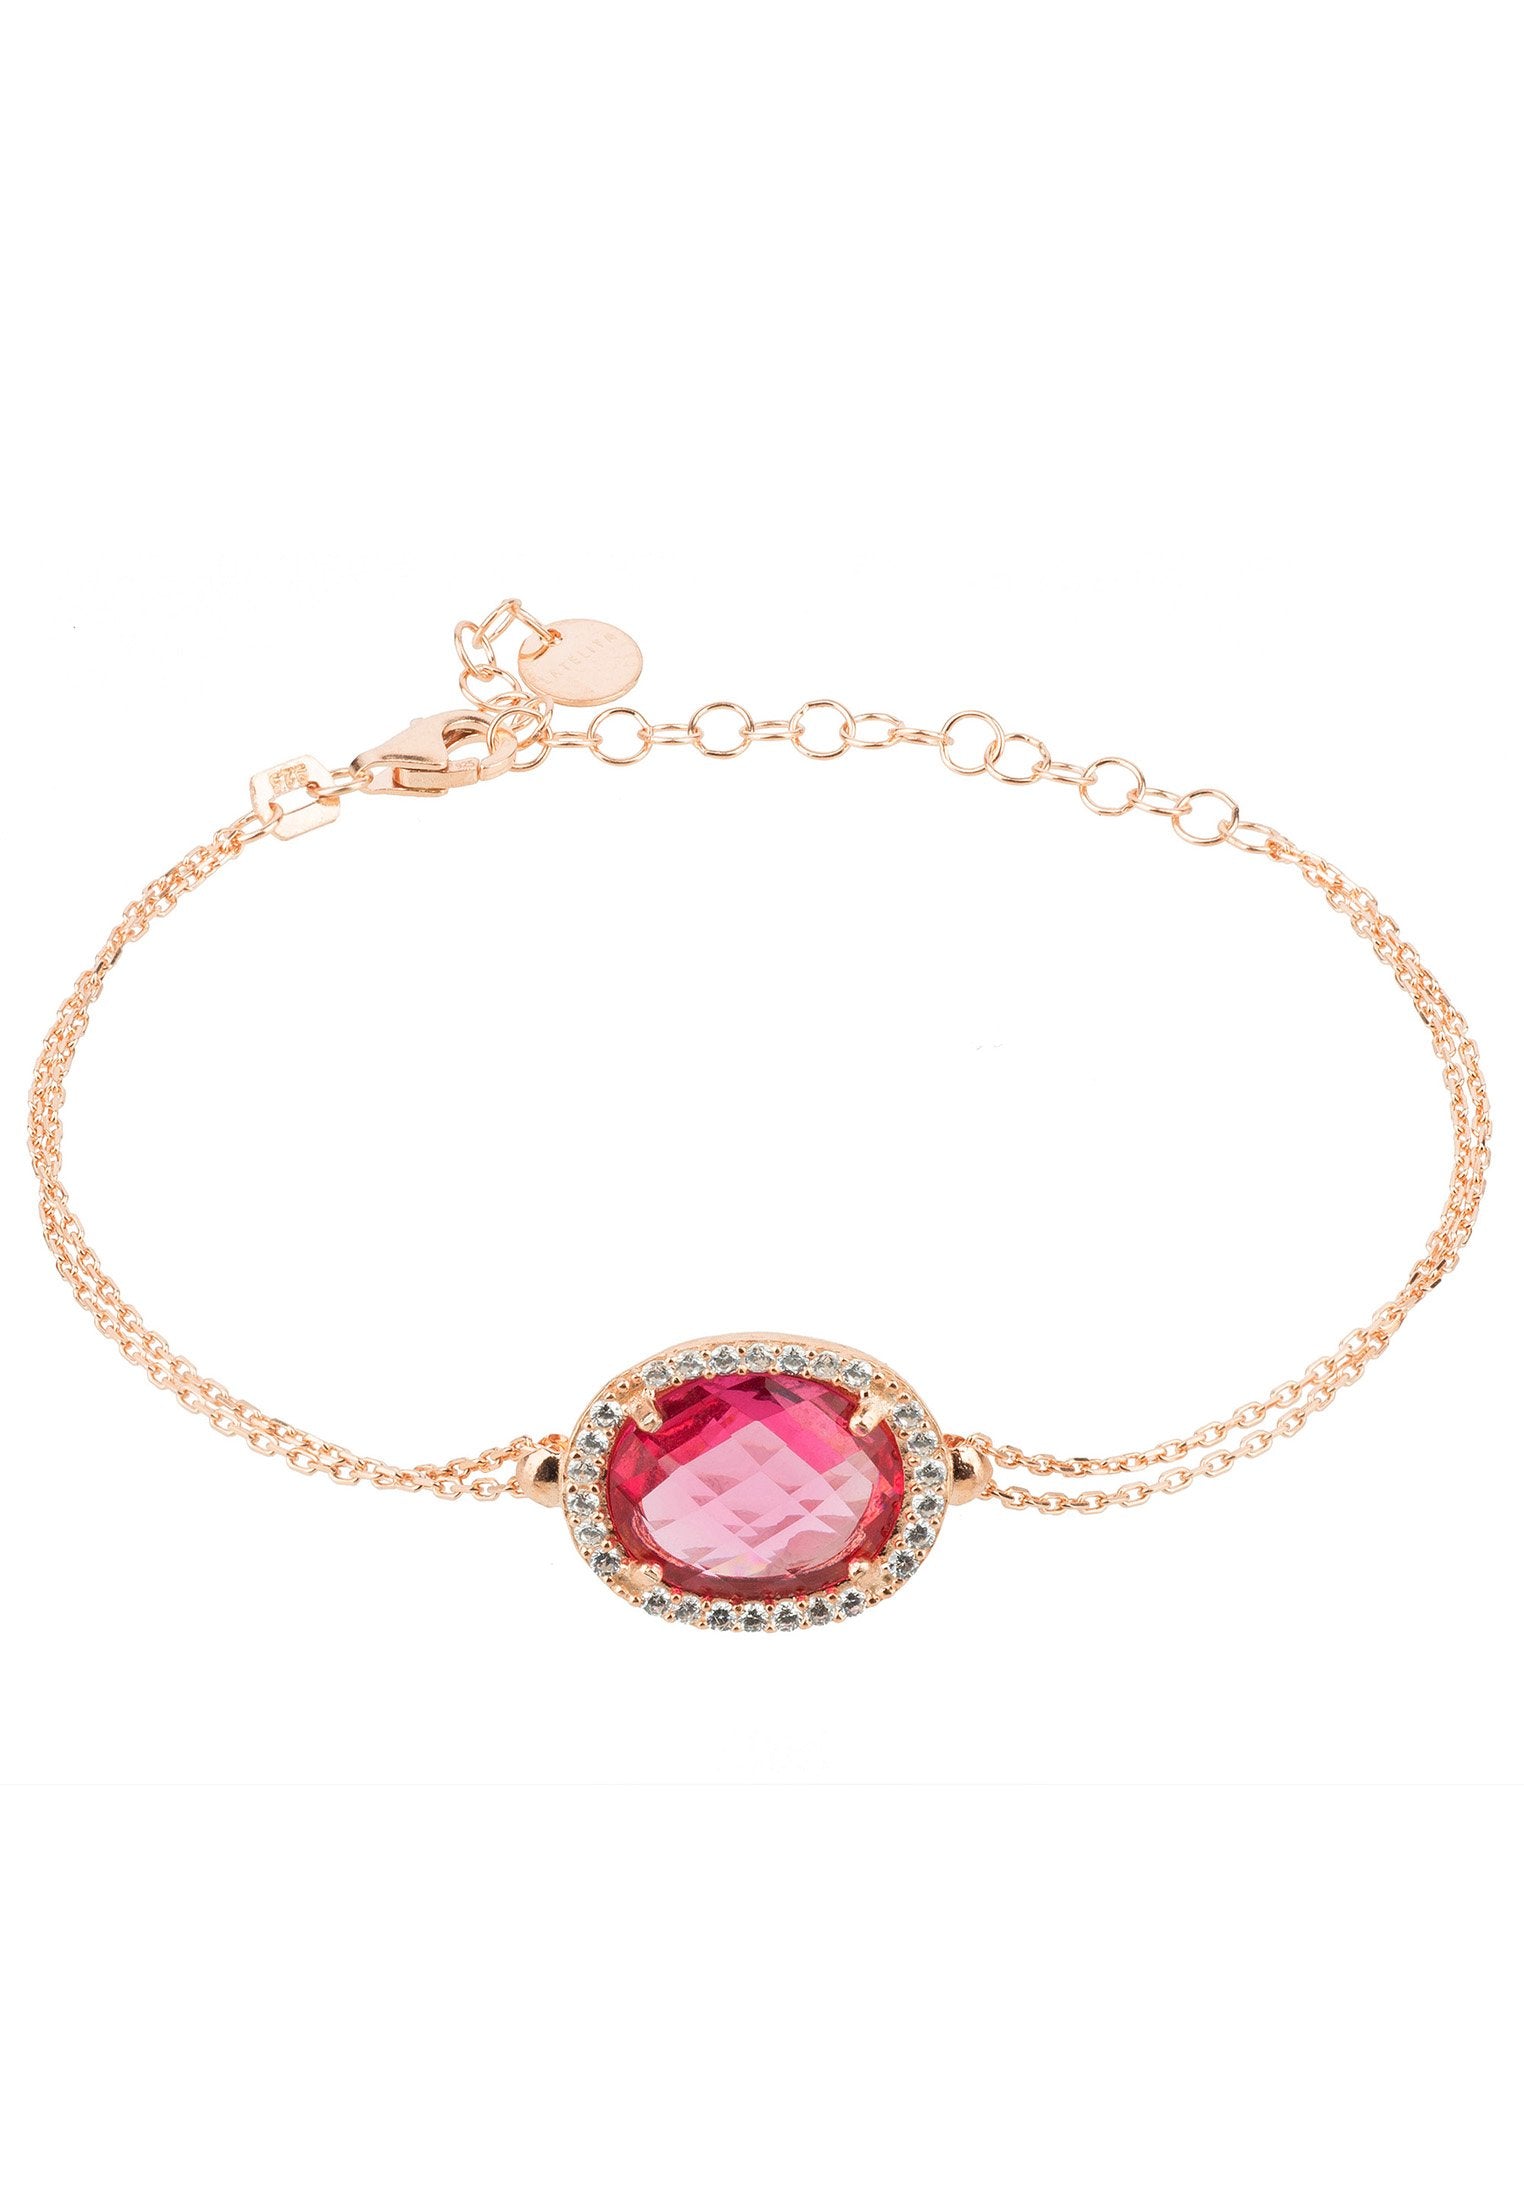 Regal Oval Gemstone Bracelet in Rose Gold with Tourmaline - Ideal Birthday Gift - Jewelry & Watches - Bijou Her -  -  - 